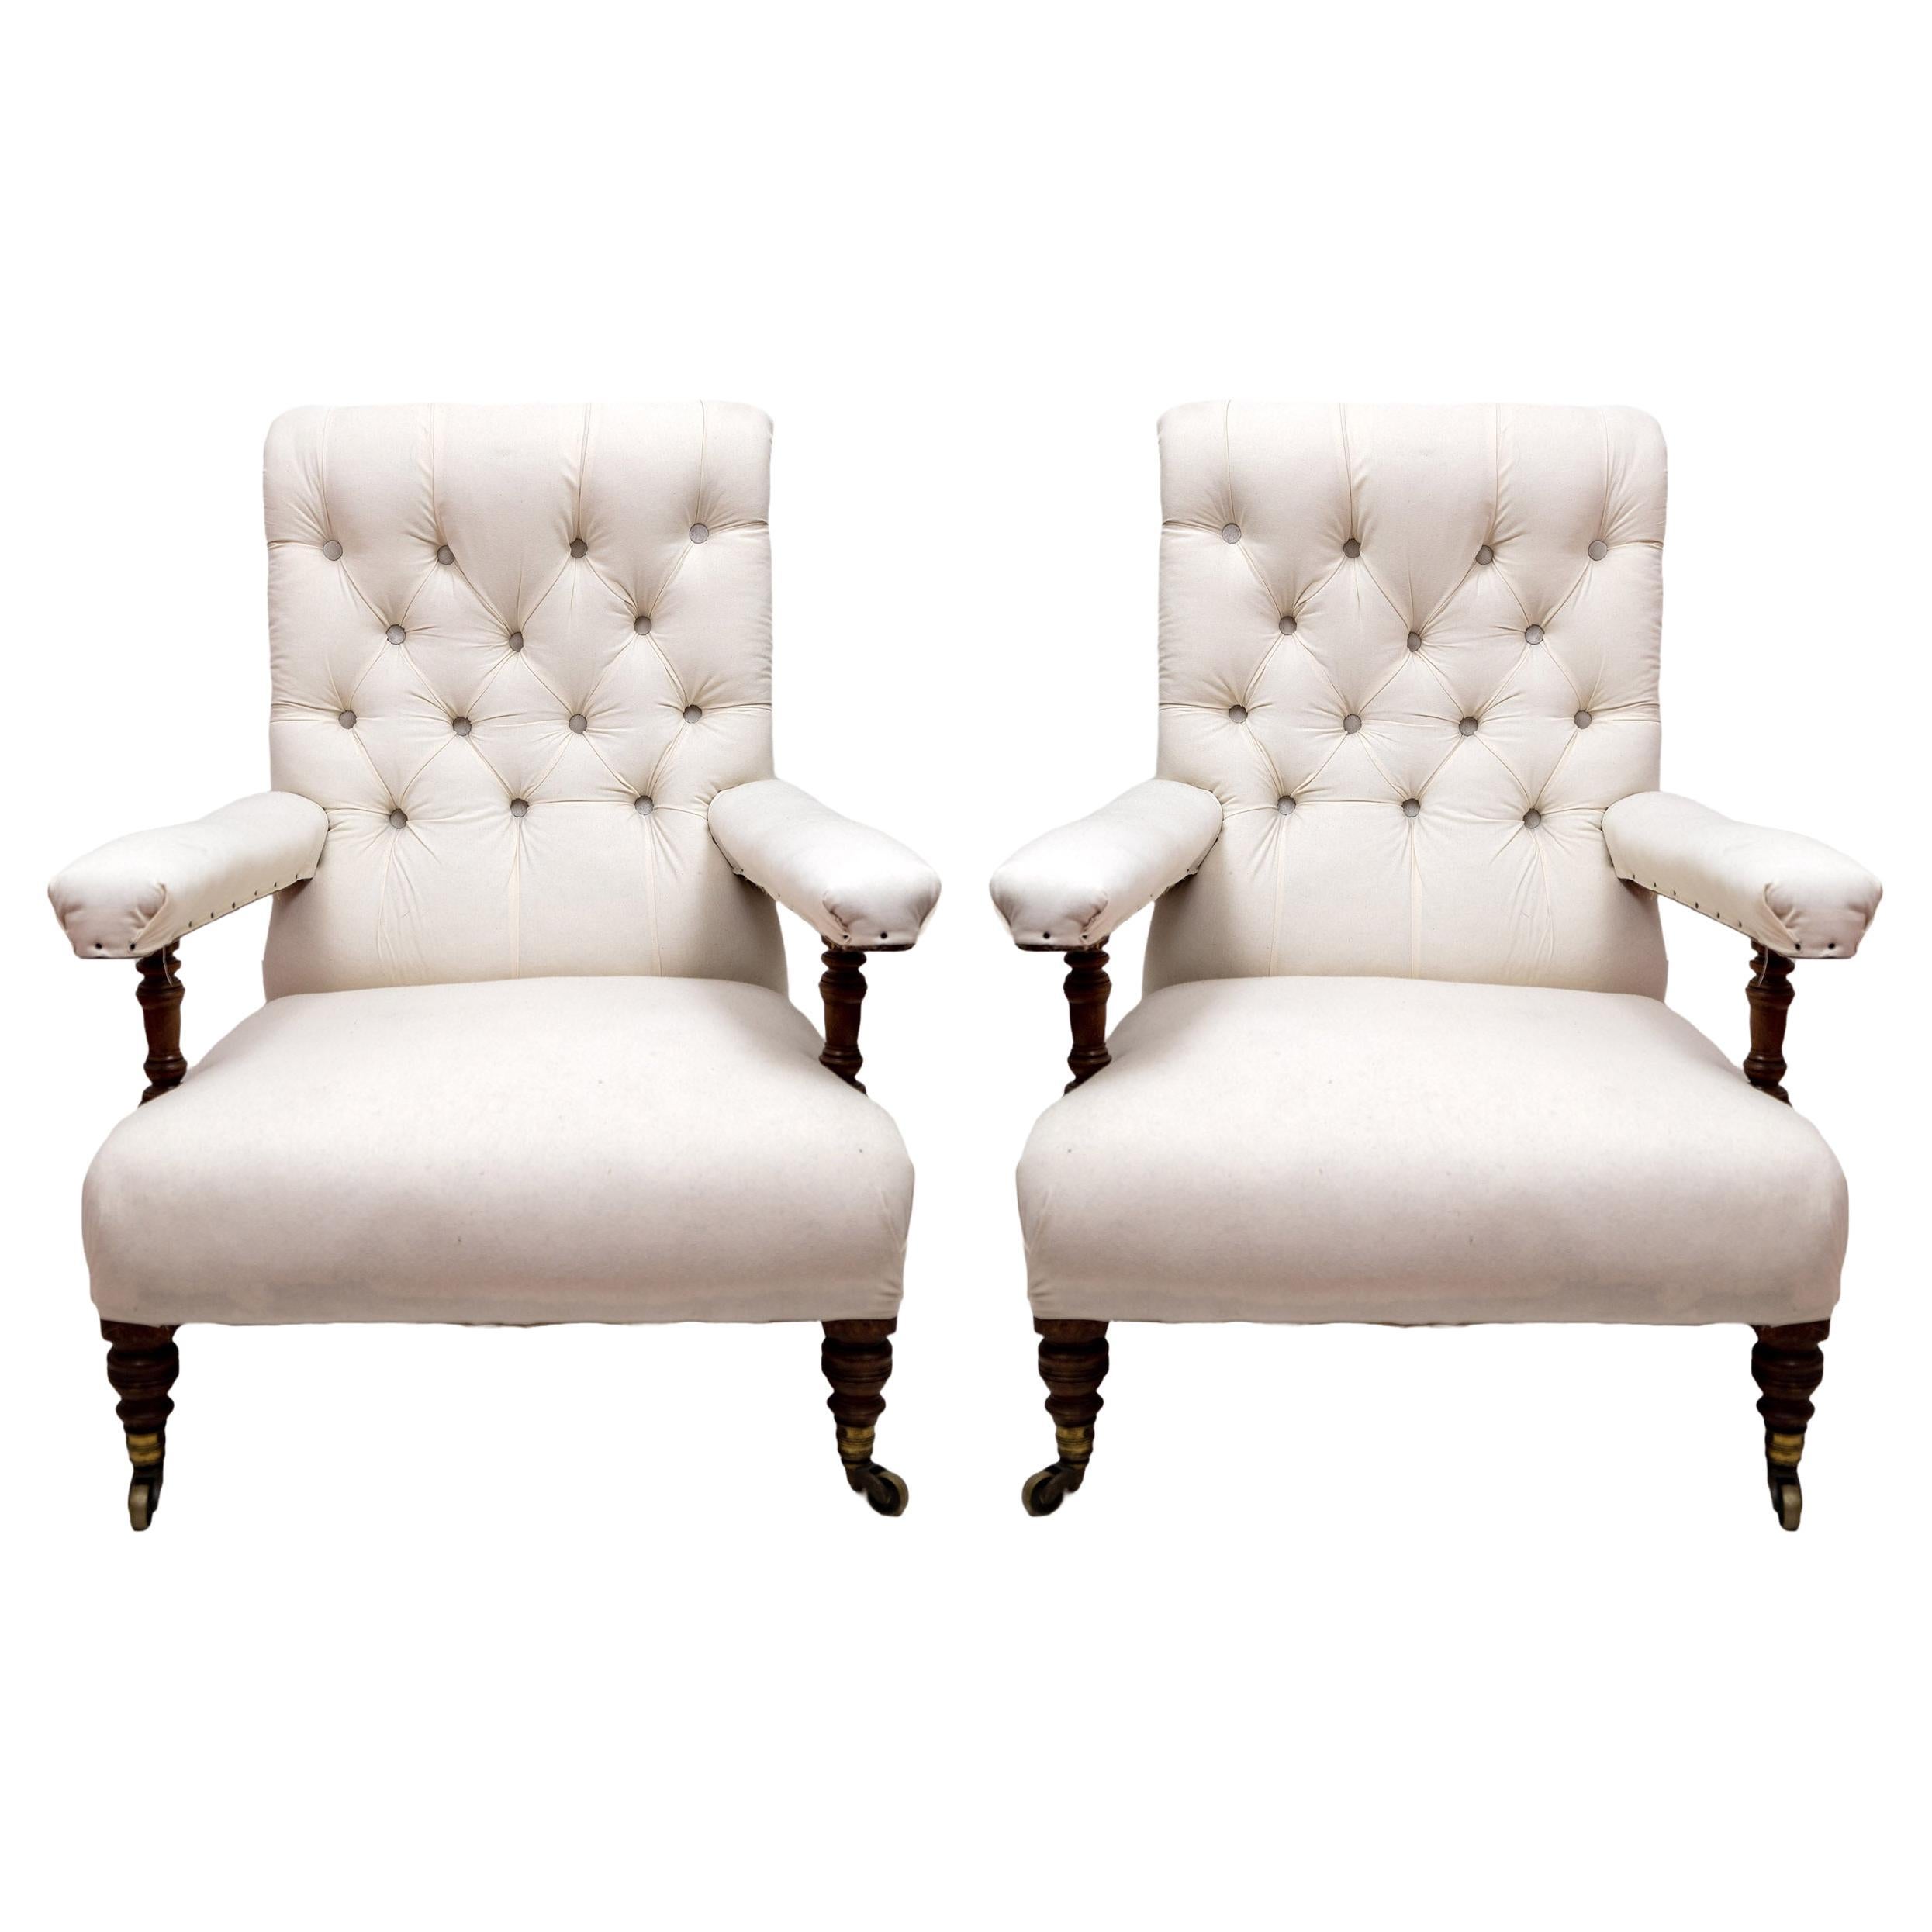 A Pair of Victorian Howard and Sons Open Armchairs, Circa 1900